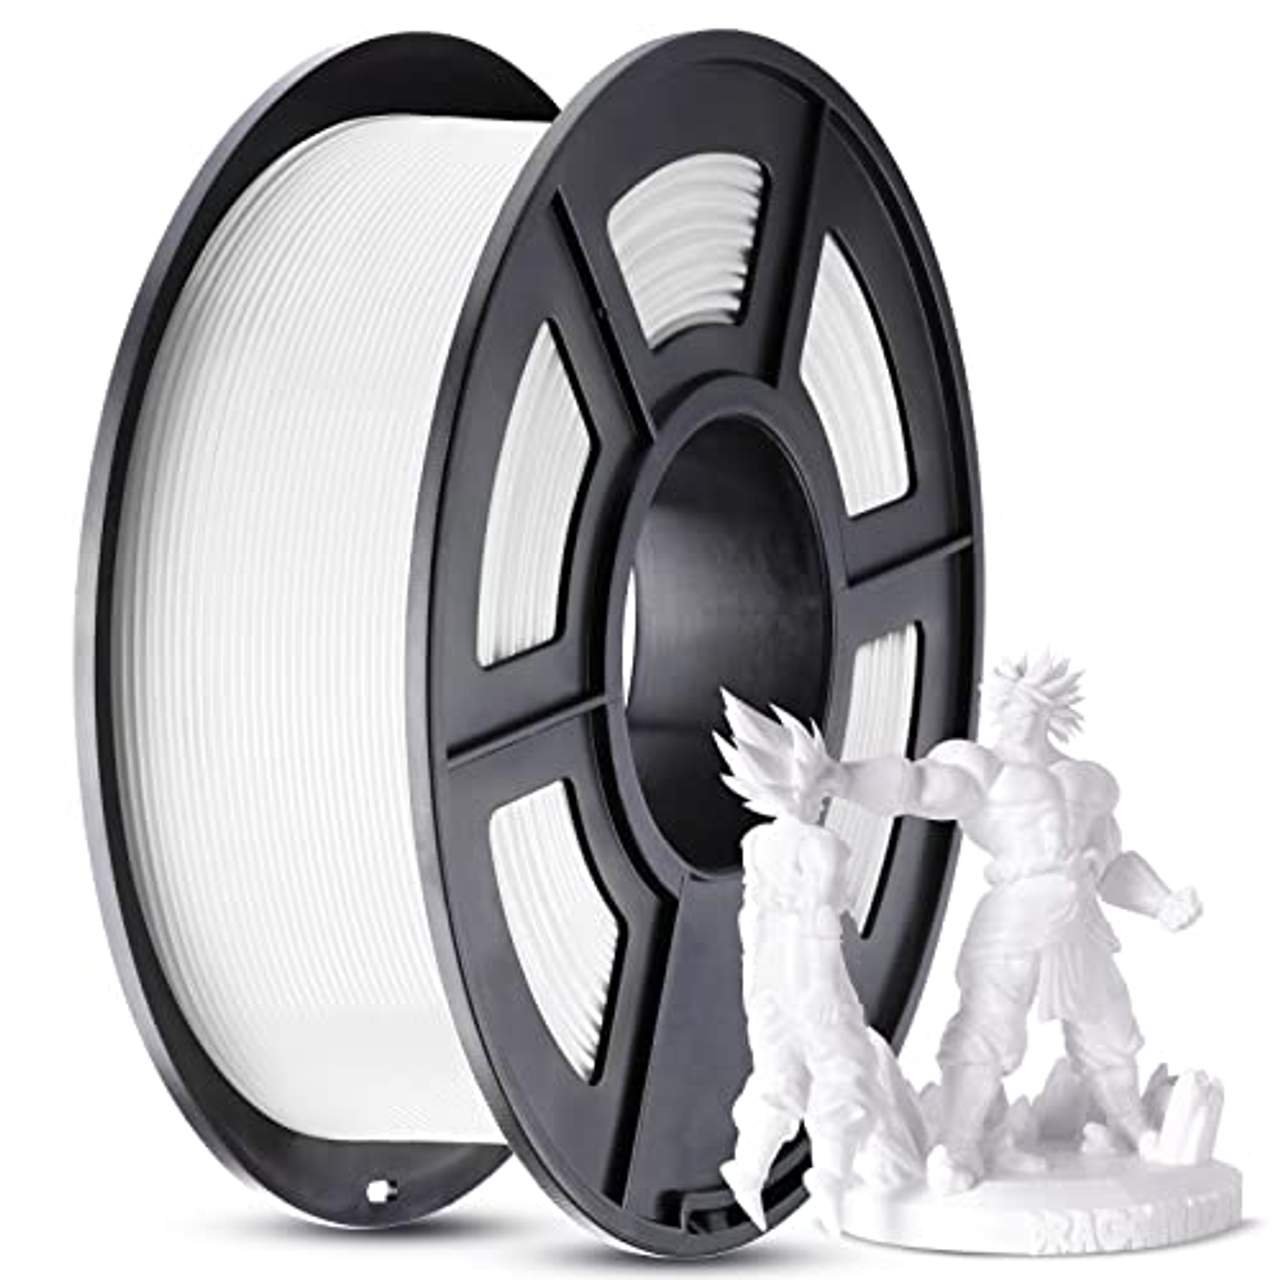 ANYCUBIC PLA Filament 1.75mm